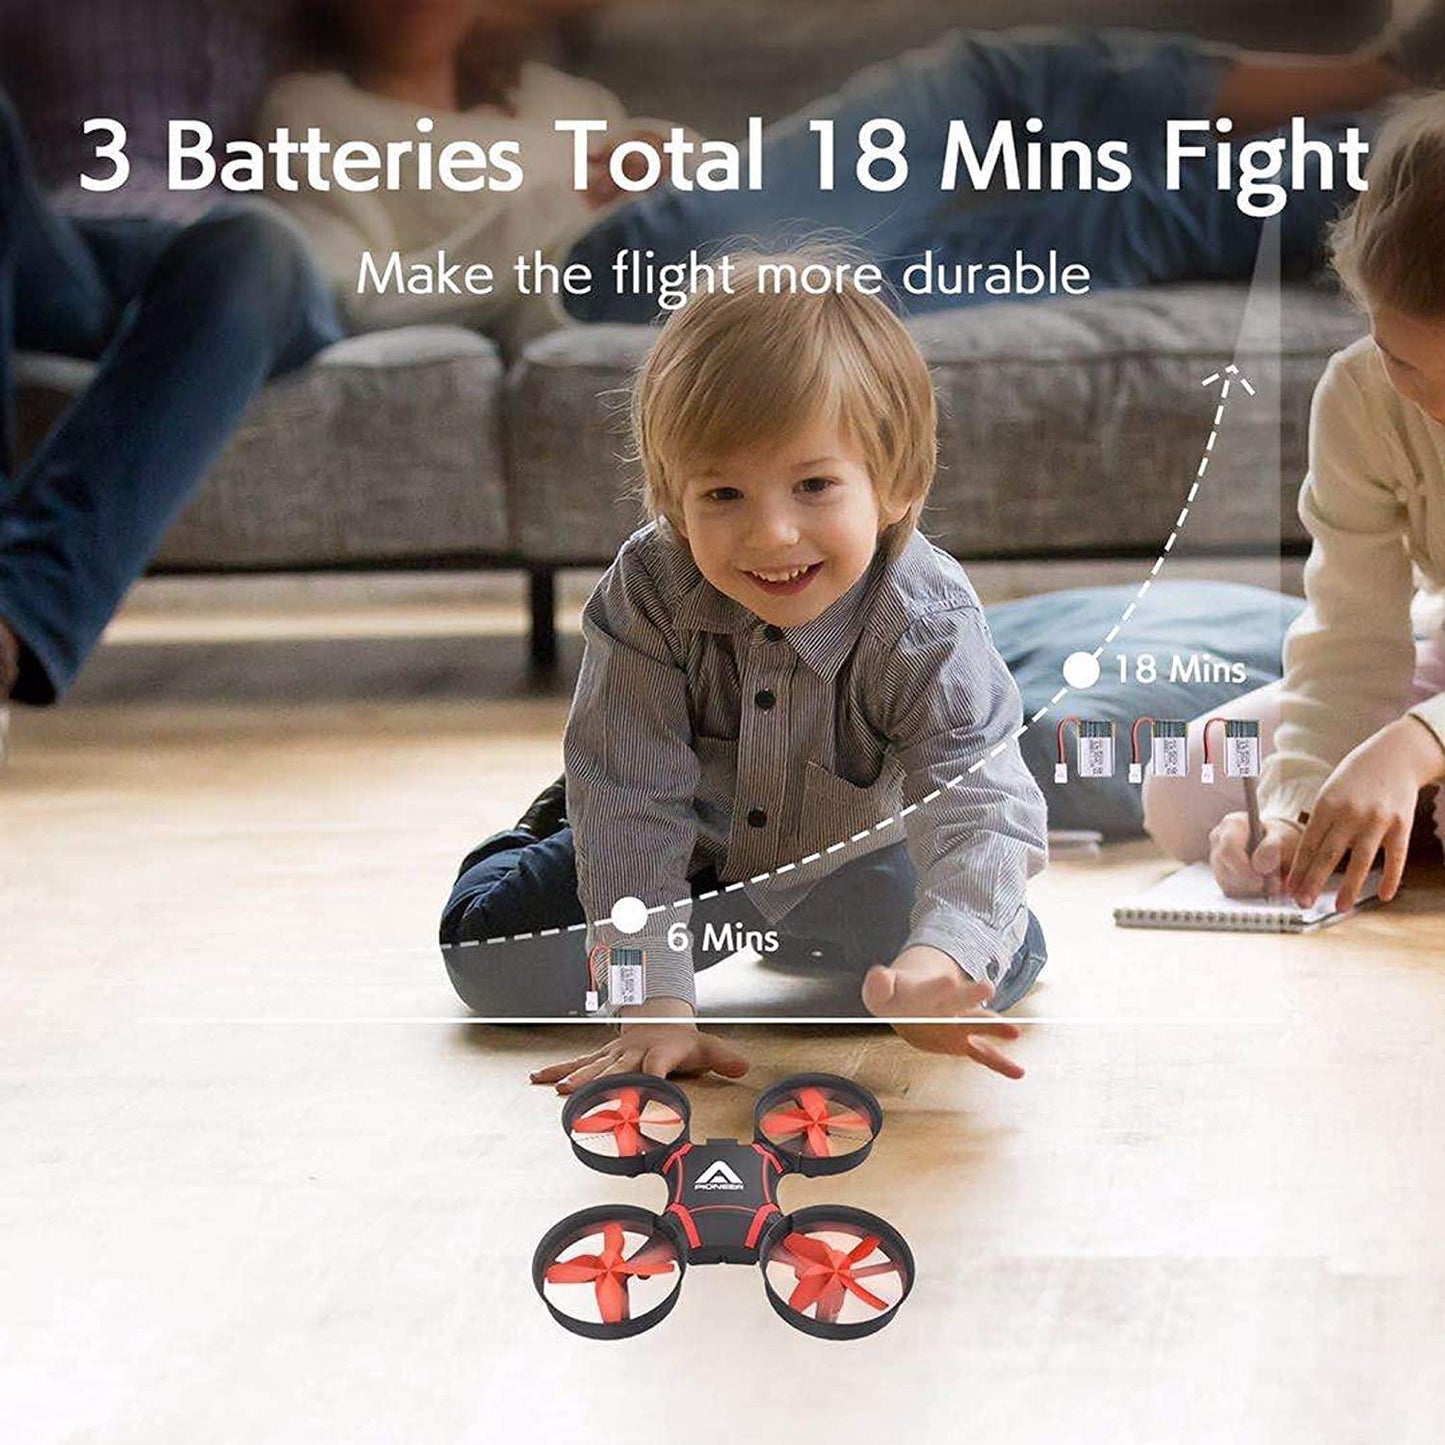 ATTOP A11 Drone for Kids - Easy Remote Control Drone, One Key Take Off, Auto-Pairing, Altitude Hold,with 3 Batteries Ideal Gift for Kids - RCDrone